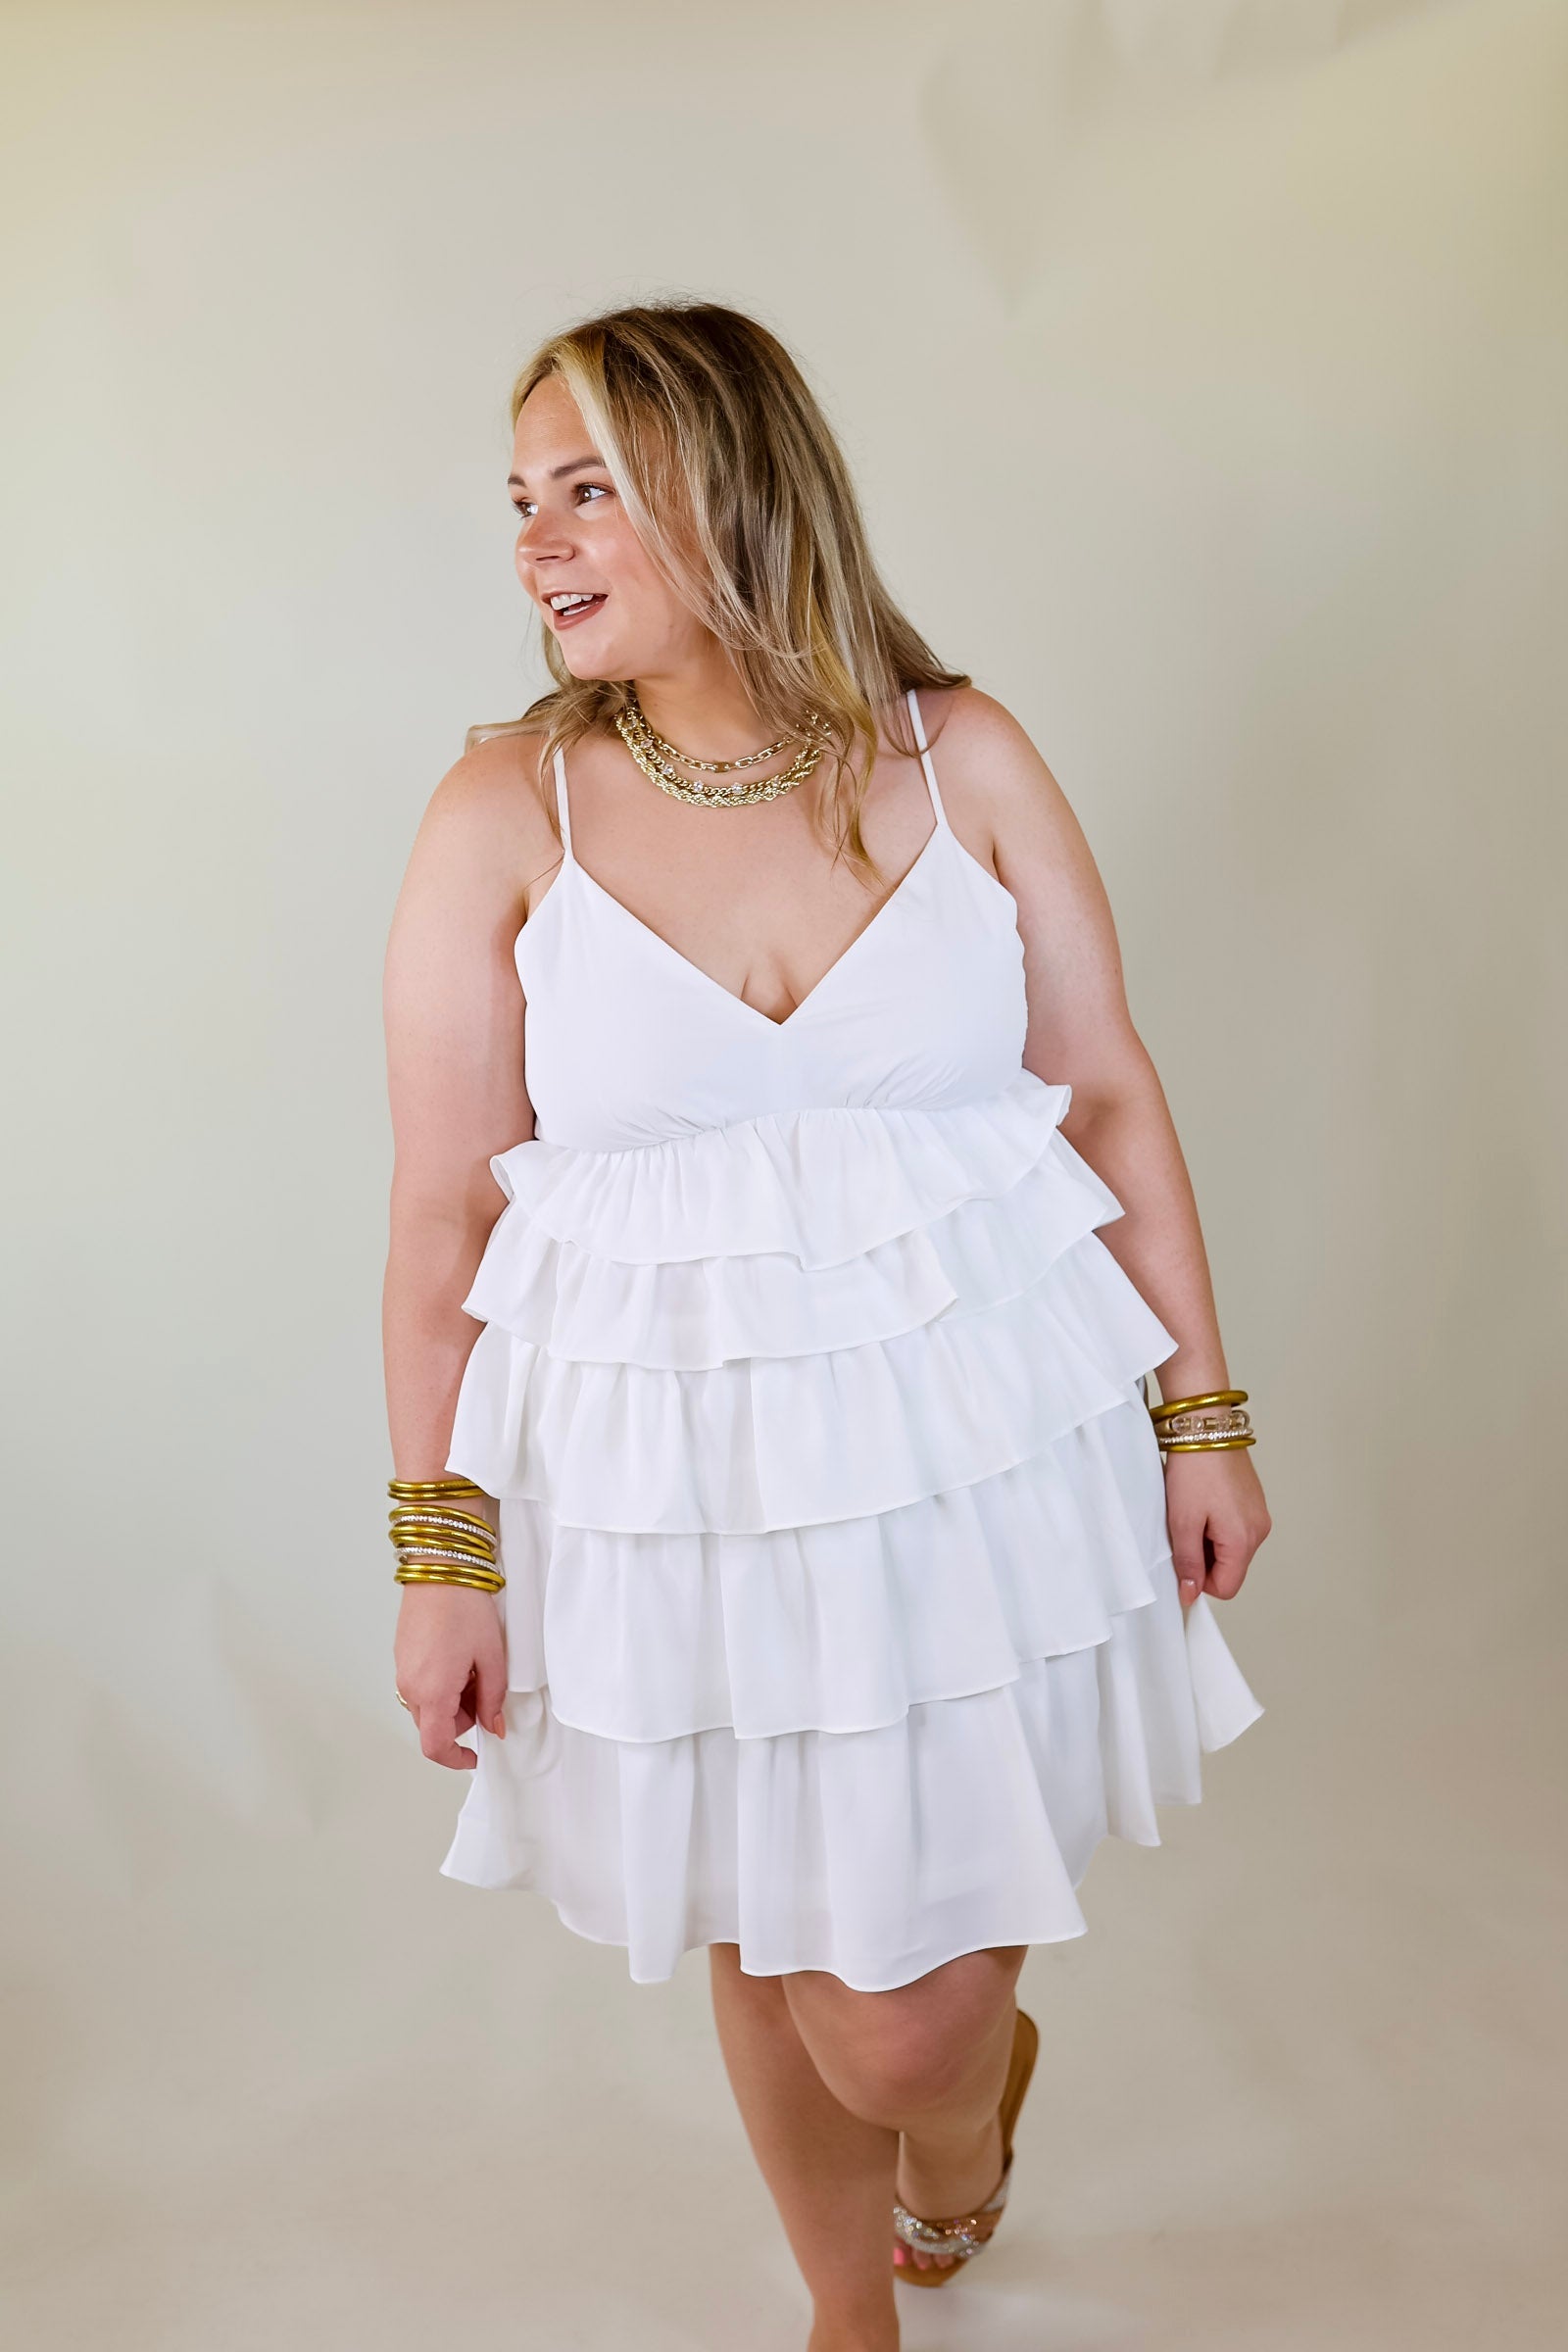 Dare to Dance Ruffled Spaghetti Strap Dress in White - Giddy Up Glamour Boutique